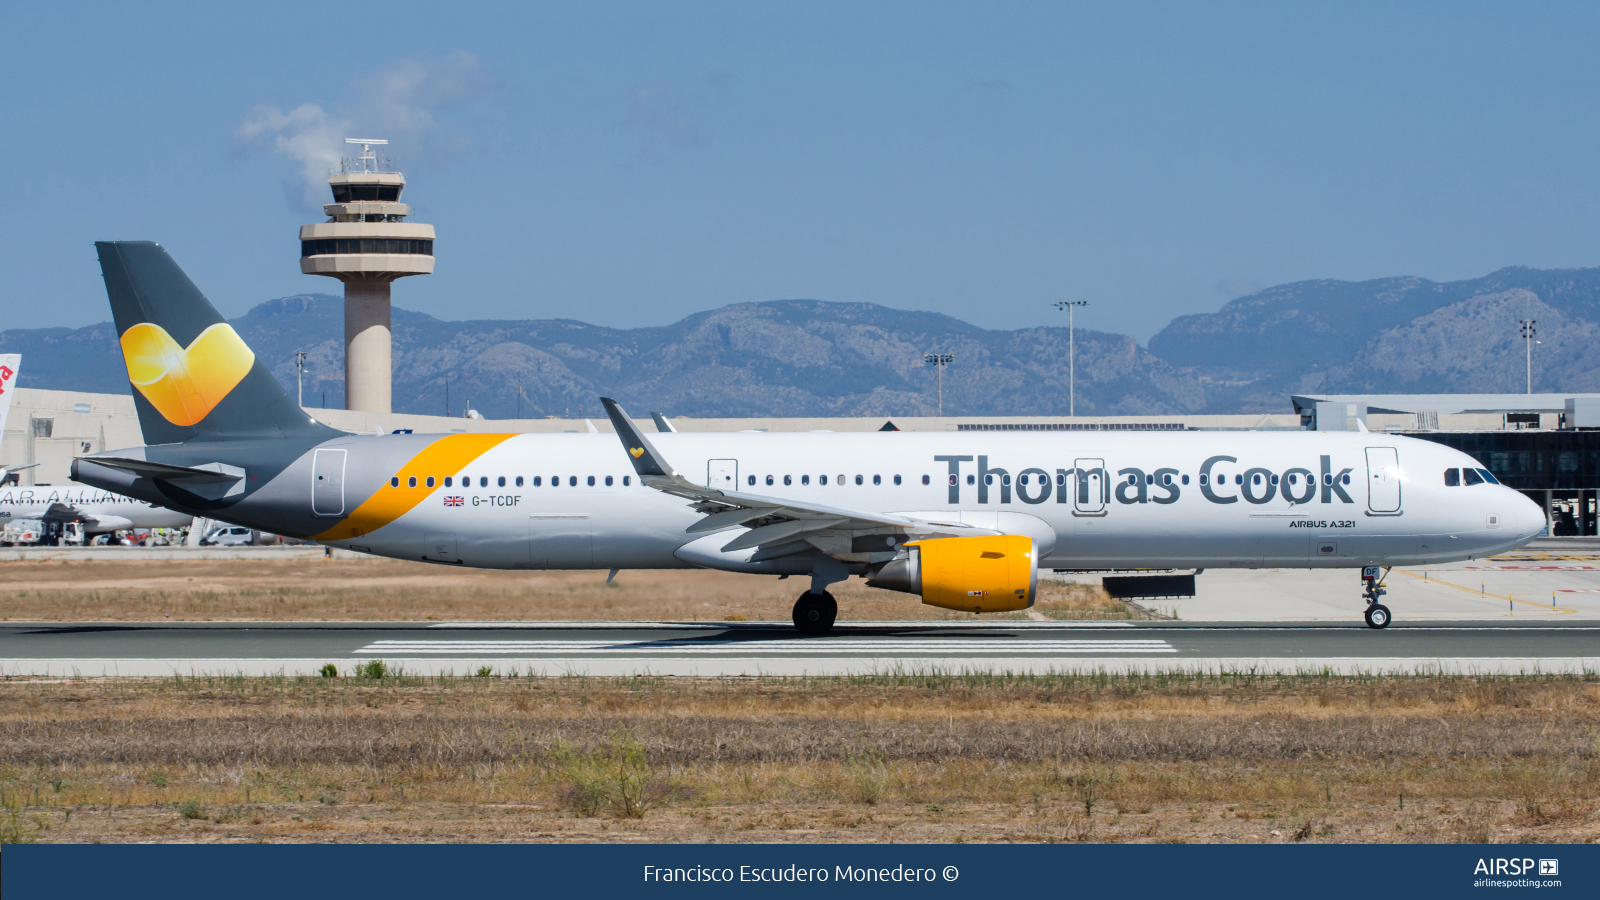 Thomas Cook Airlines  Airbus A321  G-TCDF